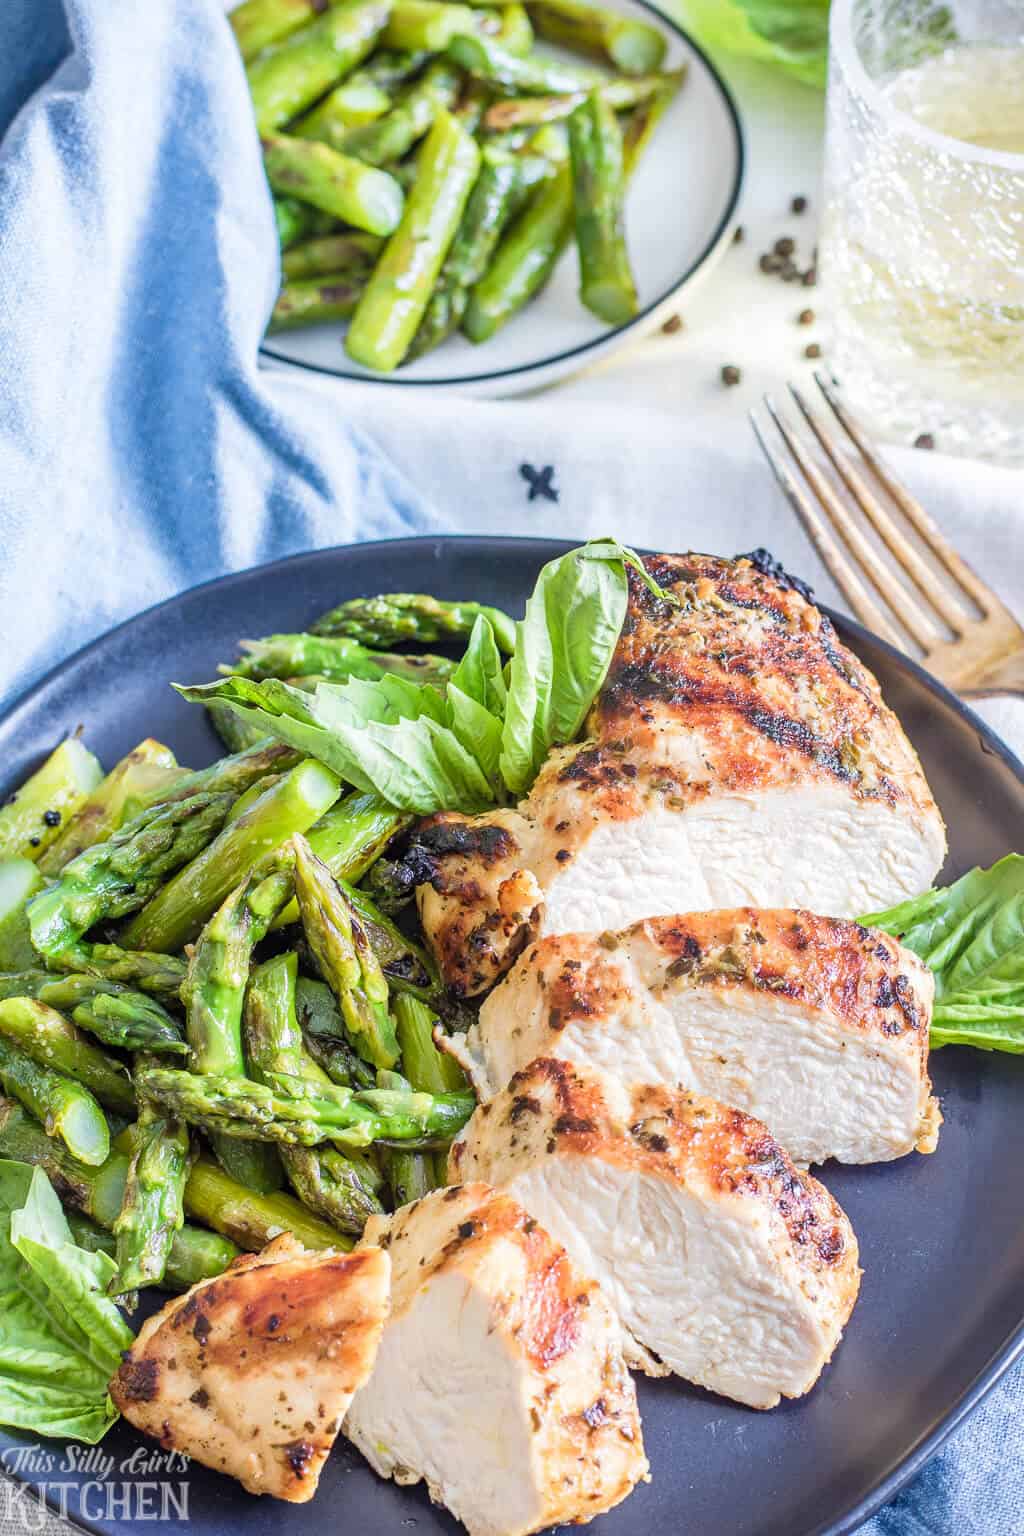 Pesto Chicken Marinade on cut up grilled chicken on plate with asparagus